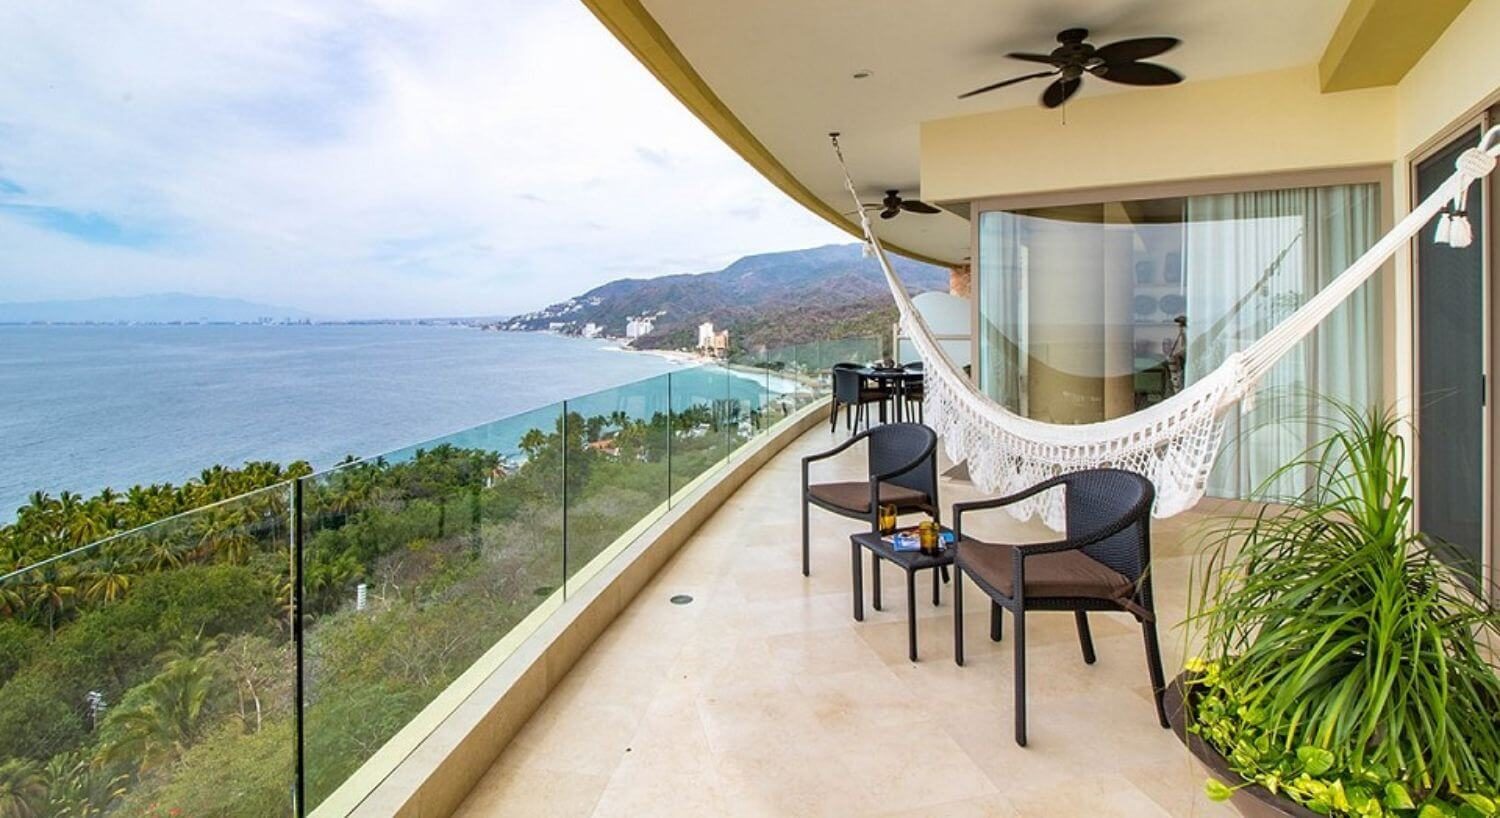 A private large balcony with patio furniture, a planter with green plants, a hammock, and dining table and chairs, overlooking the lush green mountainside, palm trees, ocean and nearby mountains.